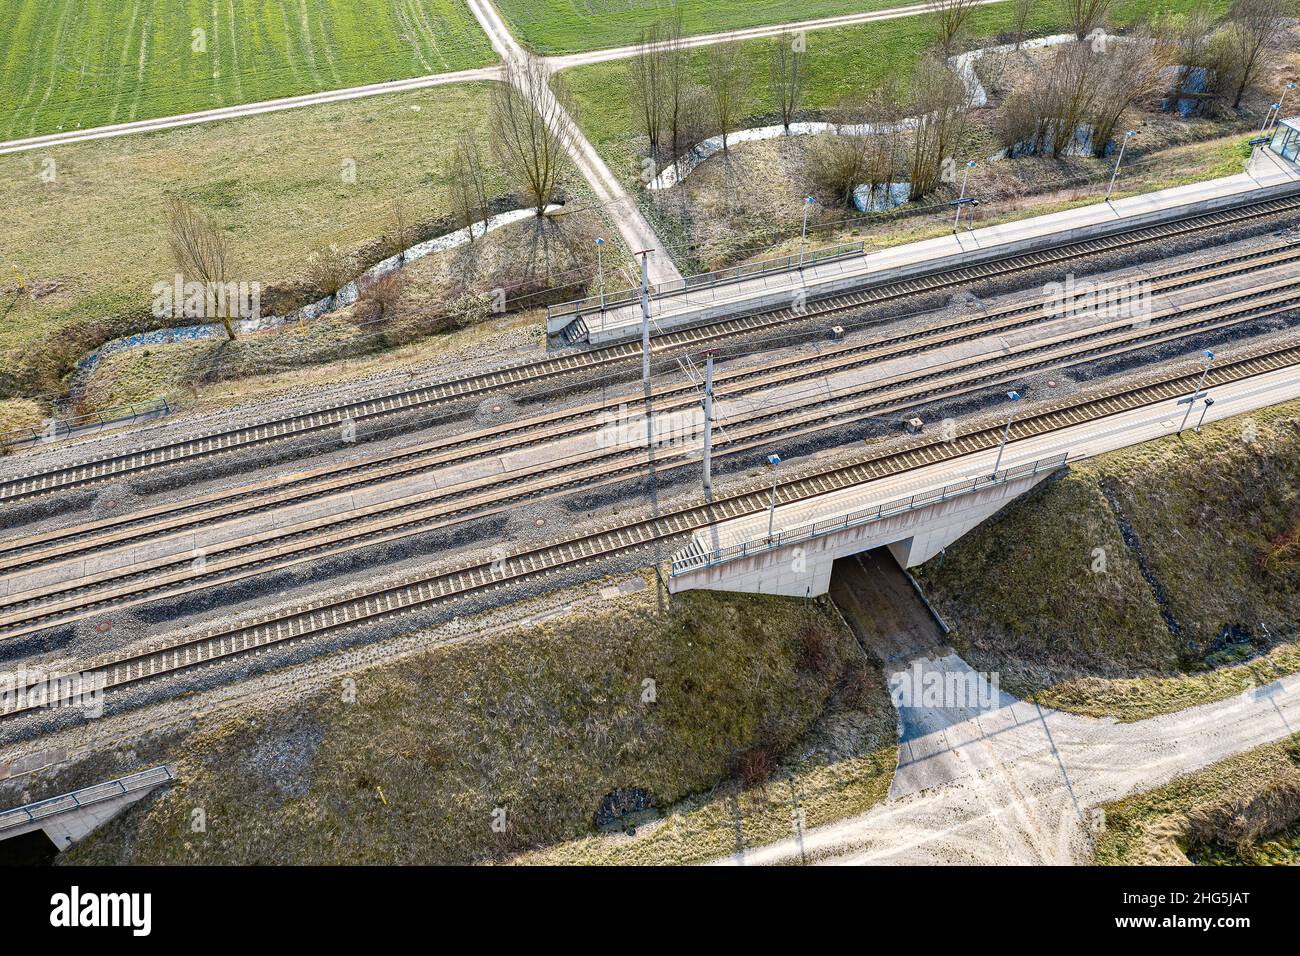 aerial view of a railway line Stock Photo